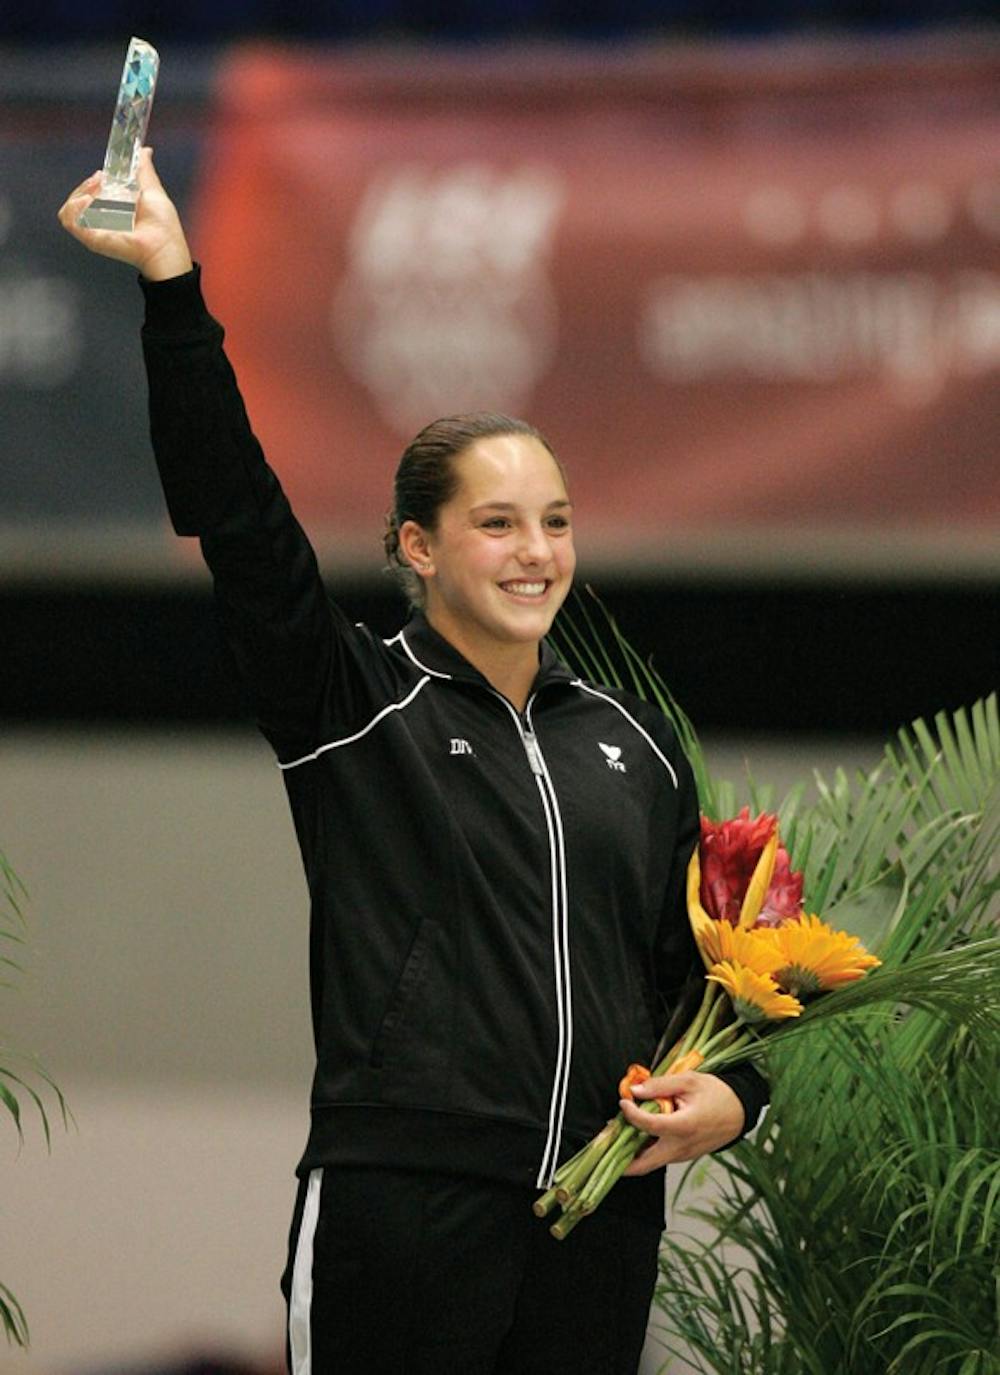 Christina Loukas waves to the crowd after she received her award for winning the women's 3-meter springboard at the U.S. Olympic diving trials in Indianapolis, Saturday, June 21, 2008.  (AP Photo/Michael Conroy)